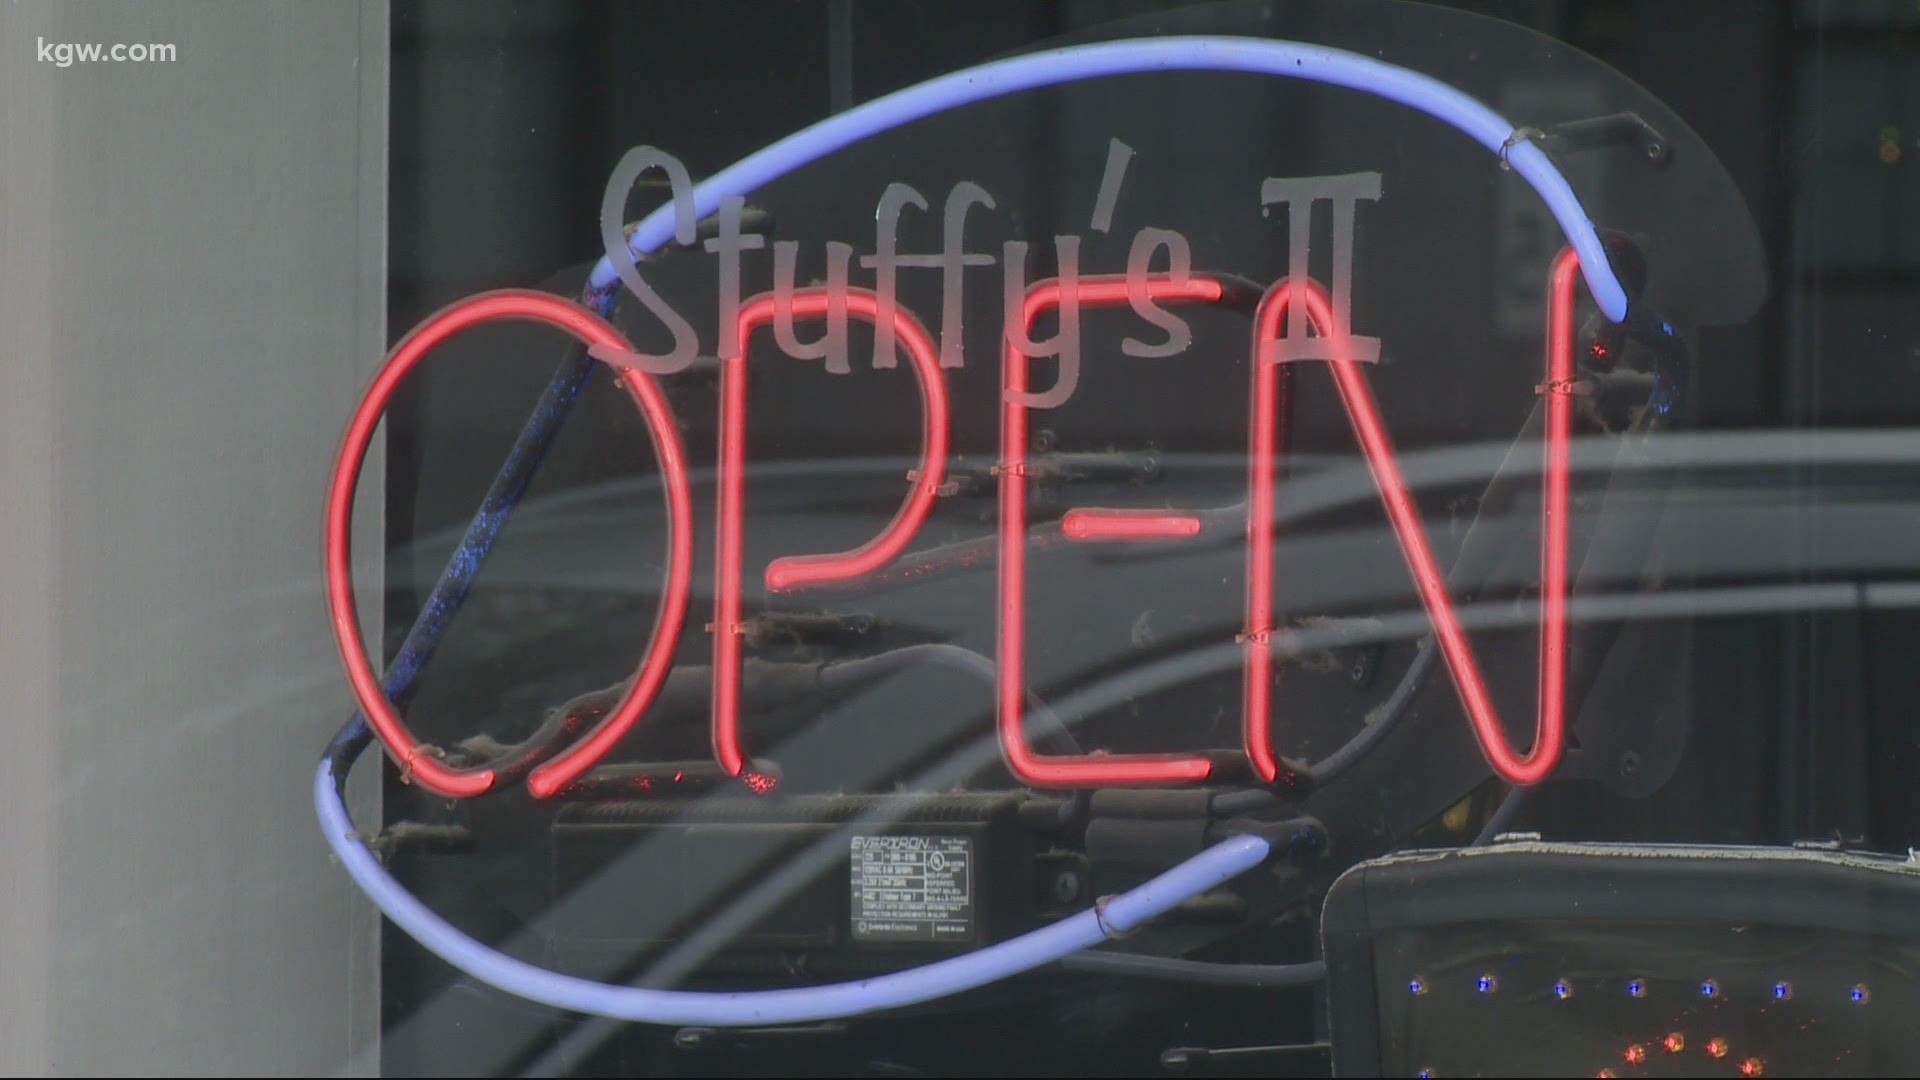 A Longview restaurant decided to open its doors to in-person dining, despite the state’s ongoing freeze. Devon Haskins spoke with the owners about their decision.